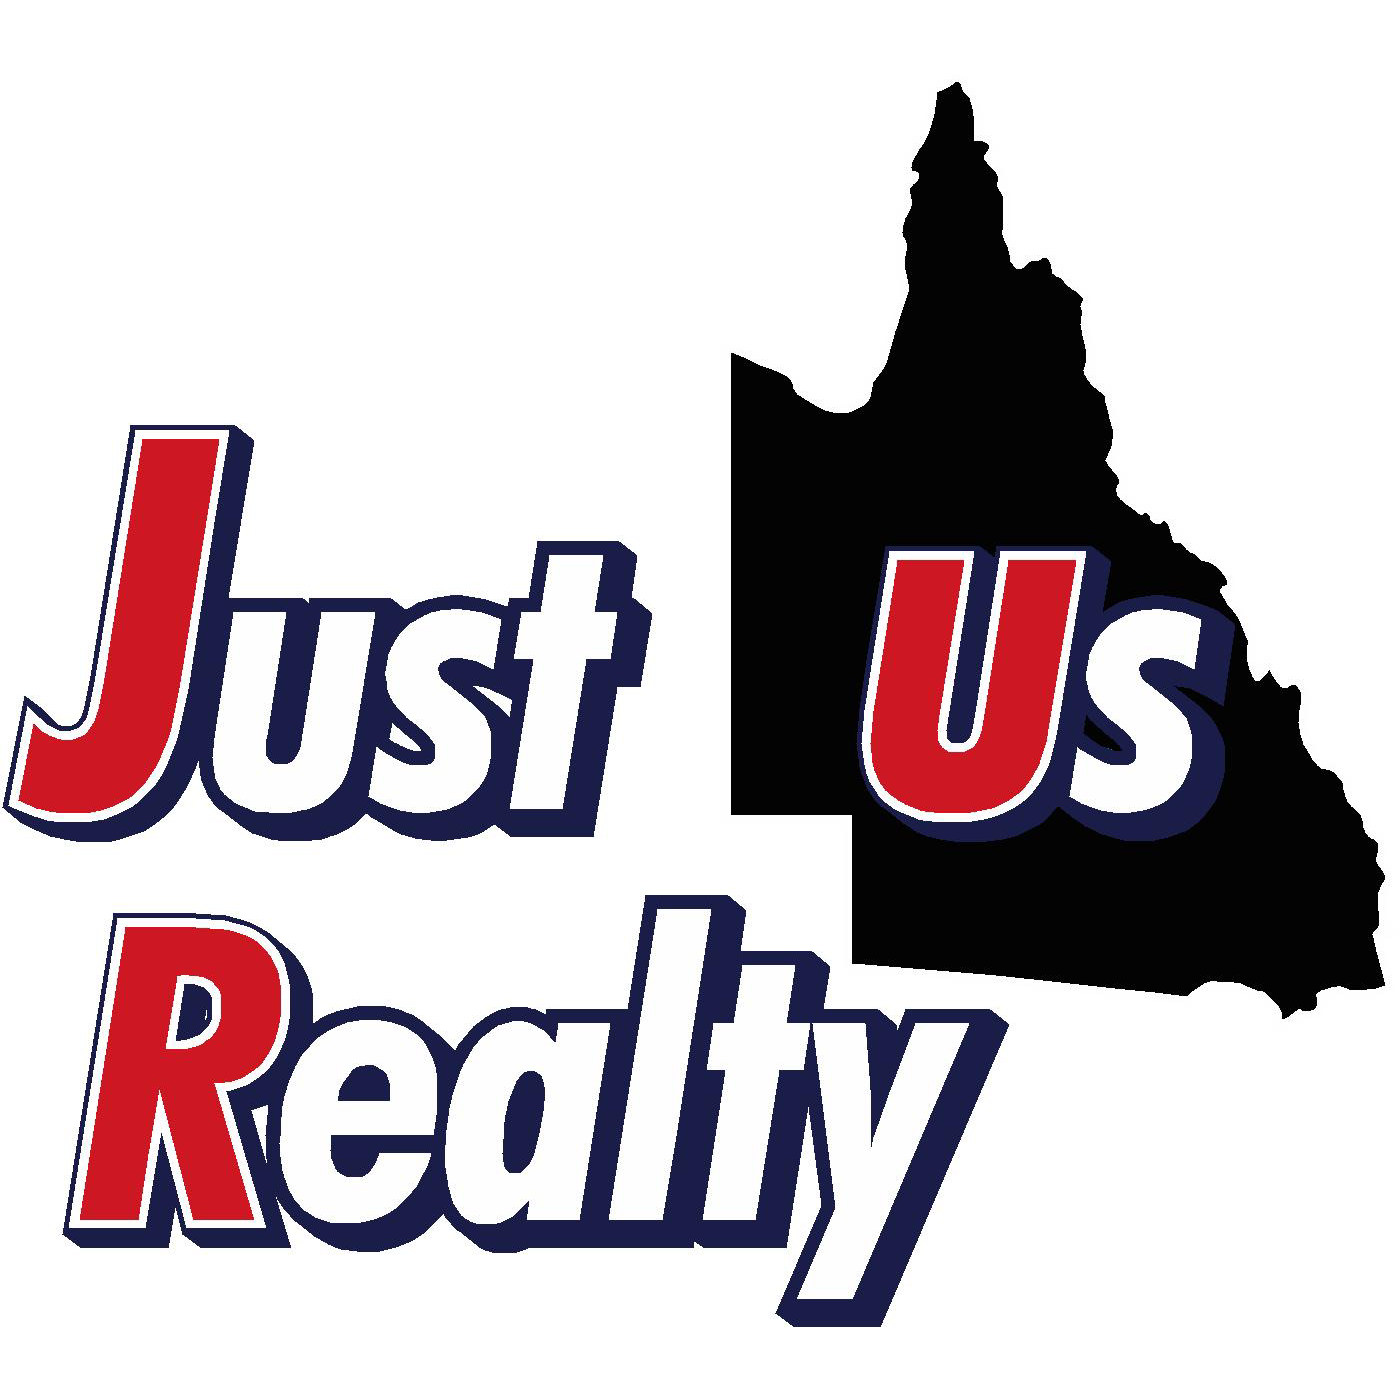 Just Us Realty - Bundaberg Central, QLD 4670 - (07) 4196 0933 | ShowMeLocal.com